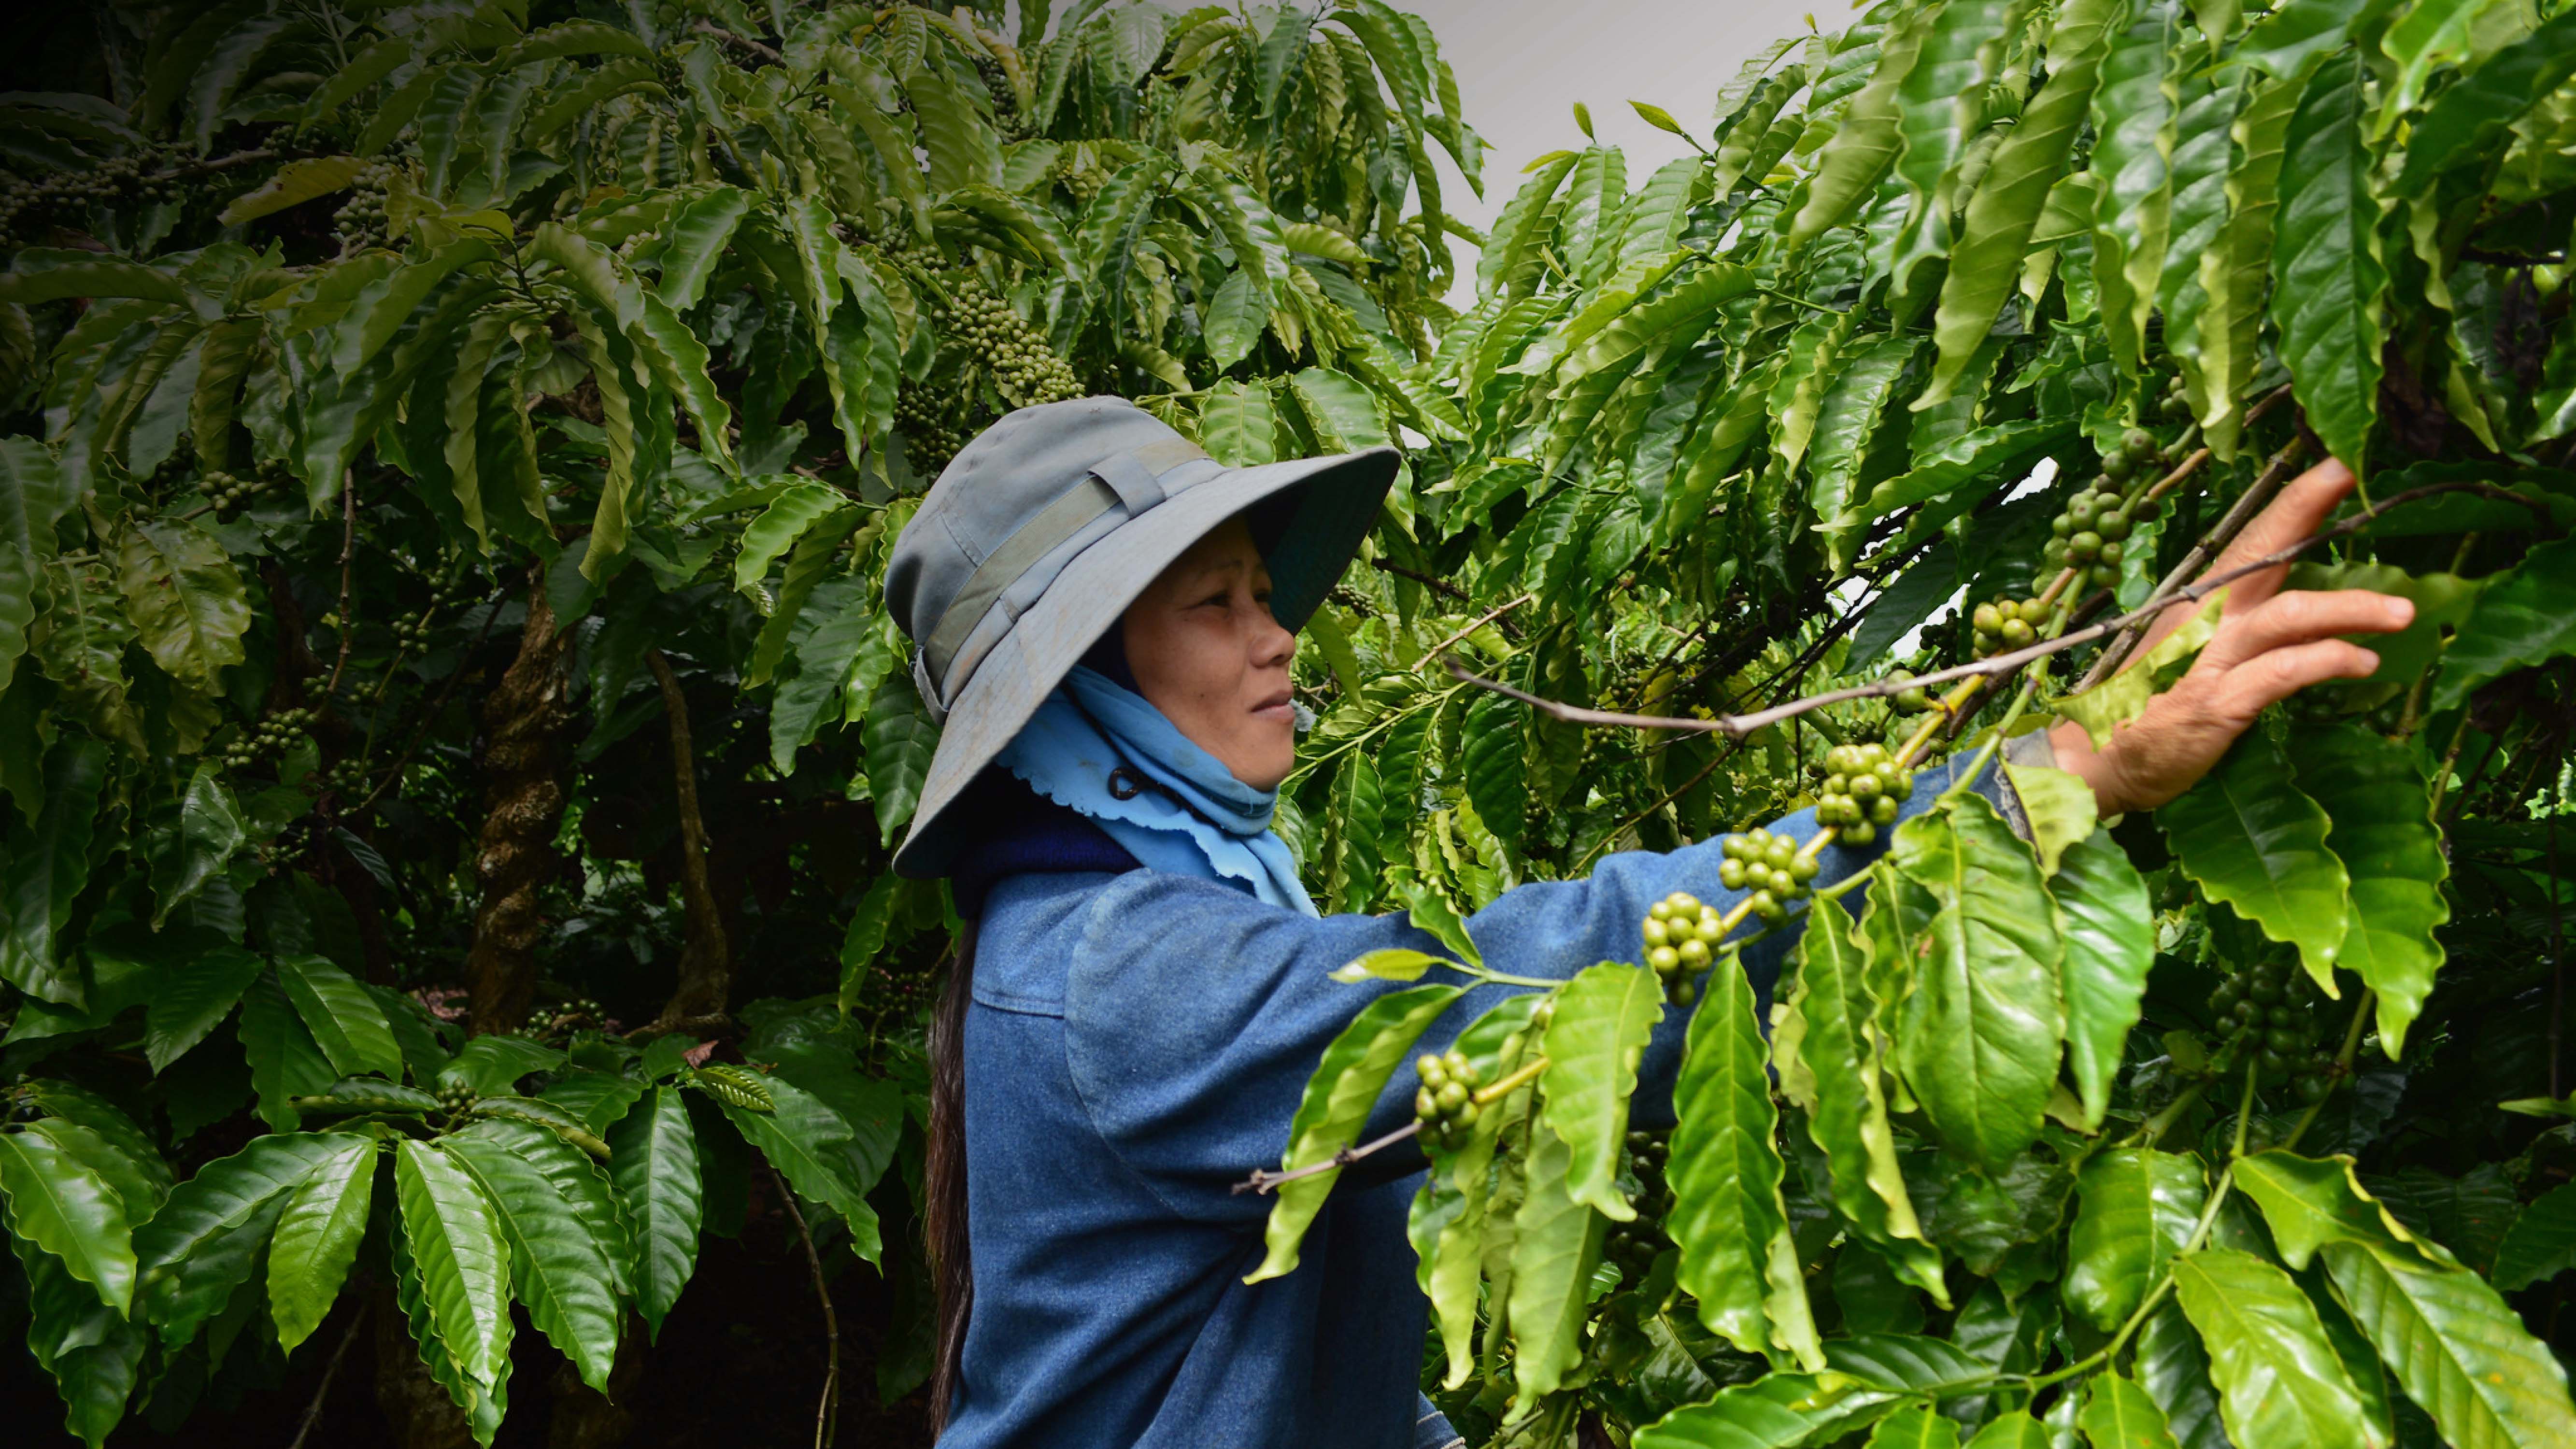 A women working with green crops